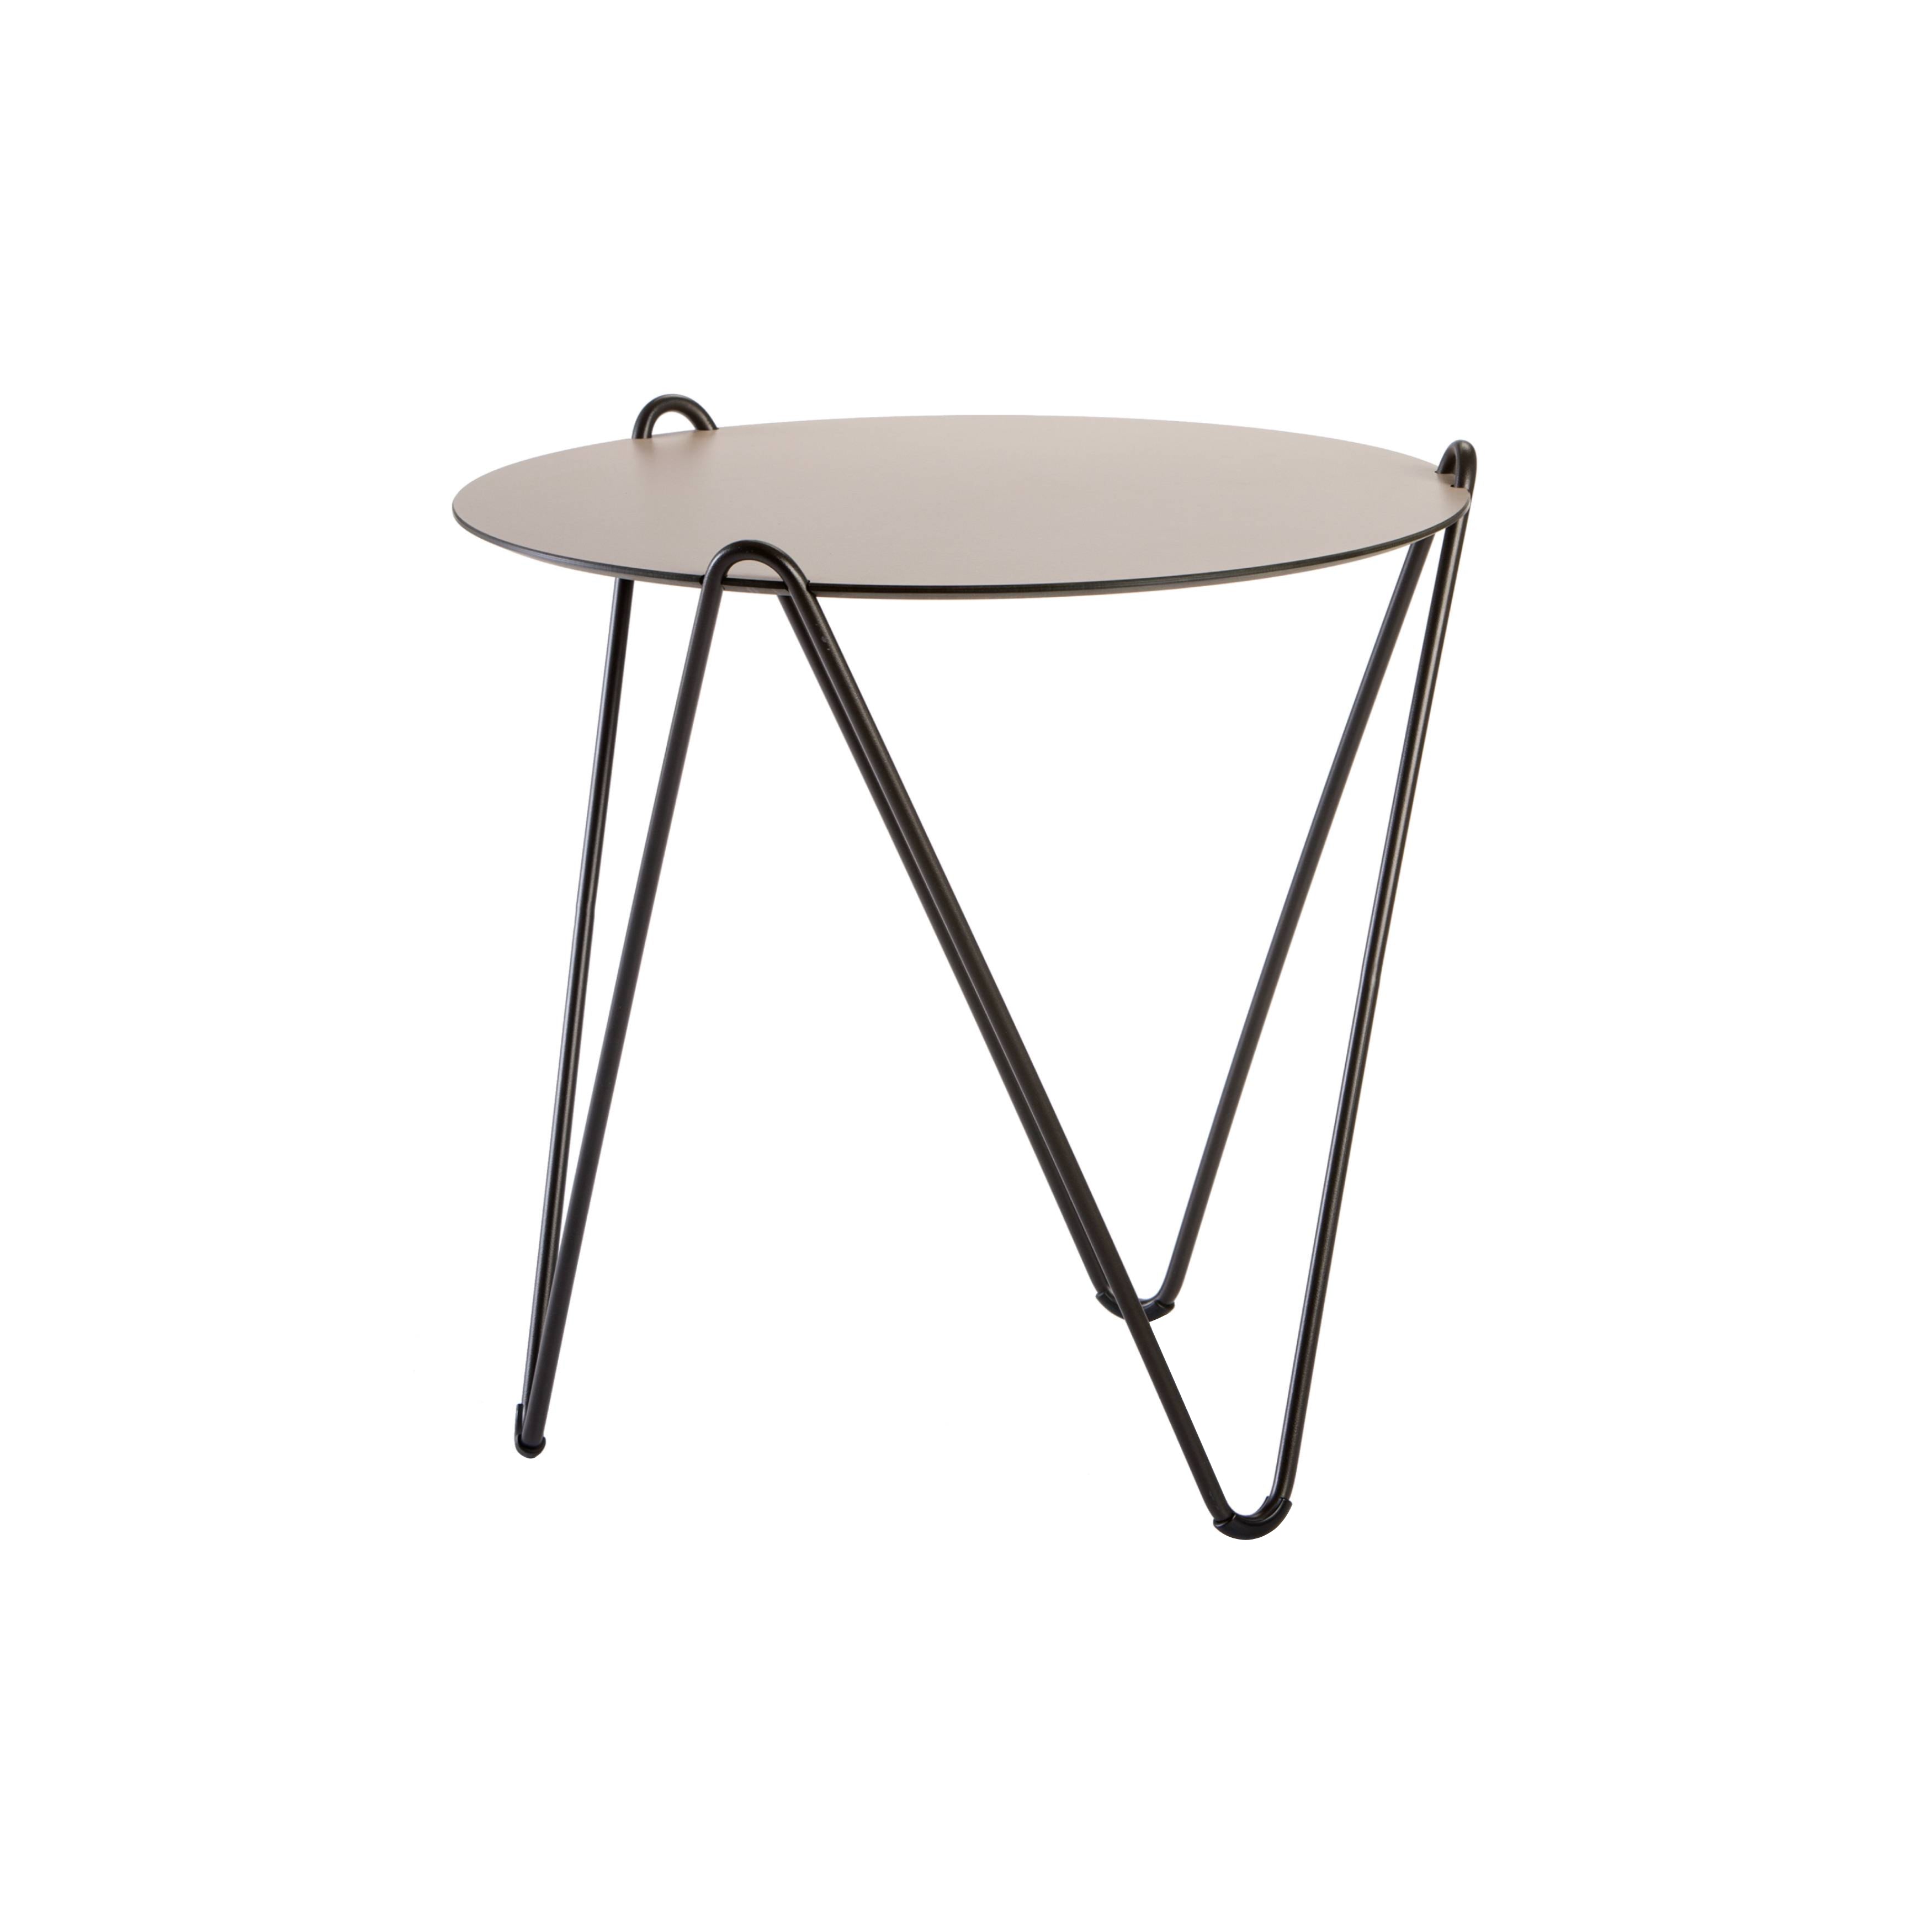 Circus Side Table: Large - 23.6